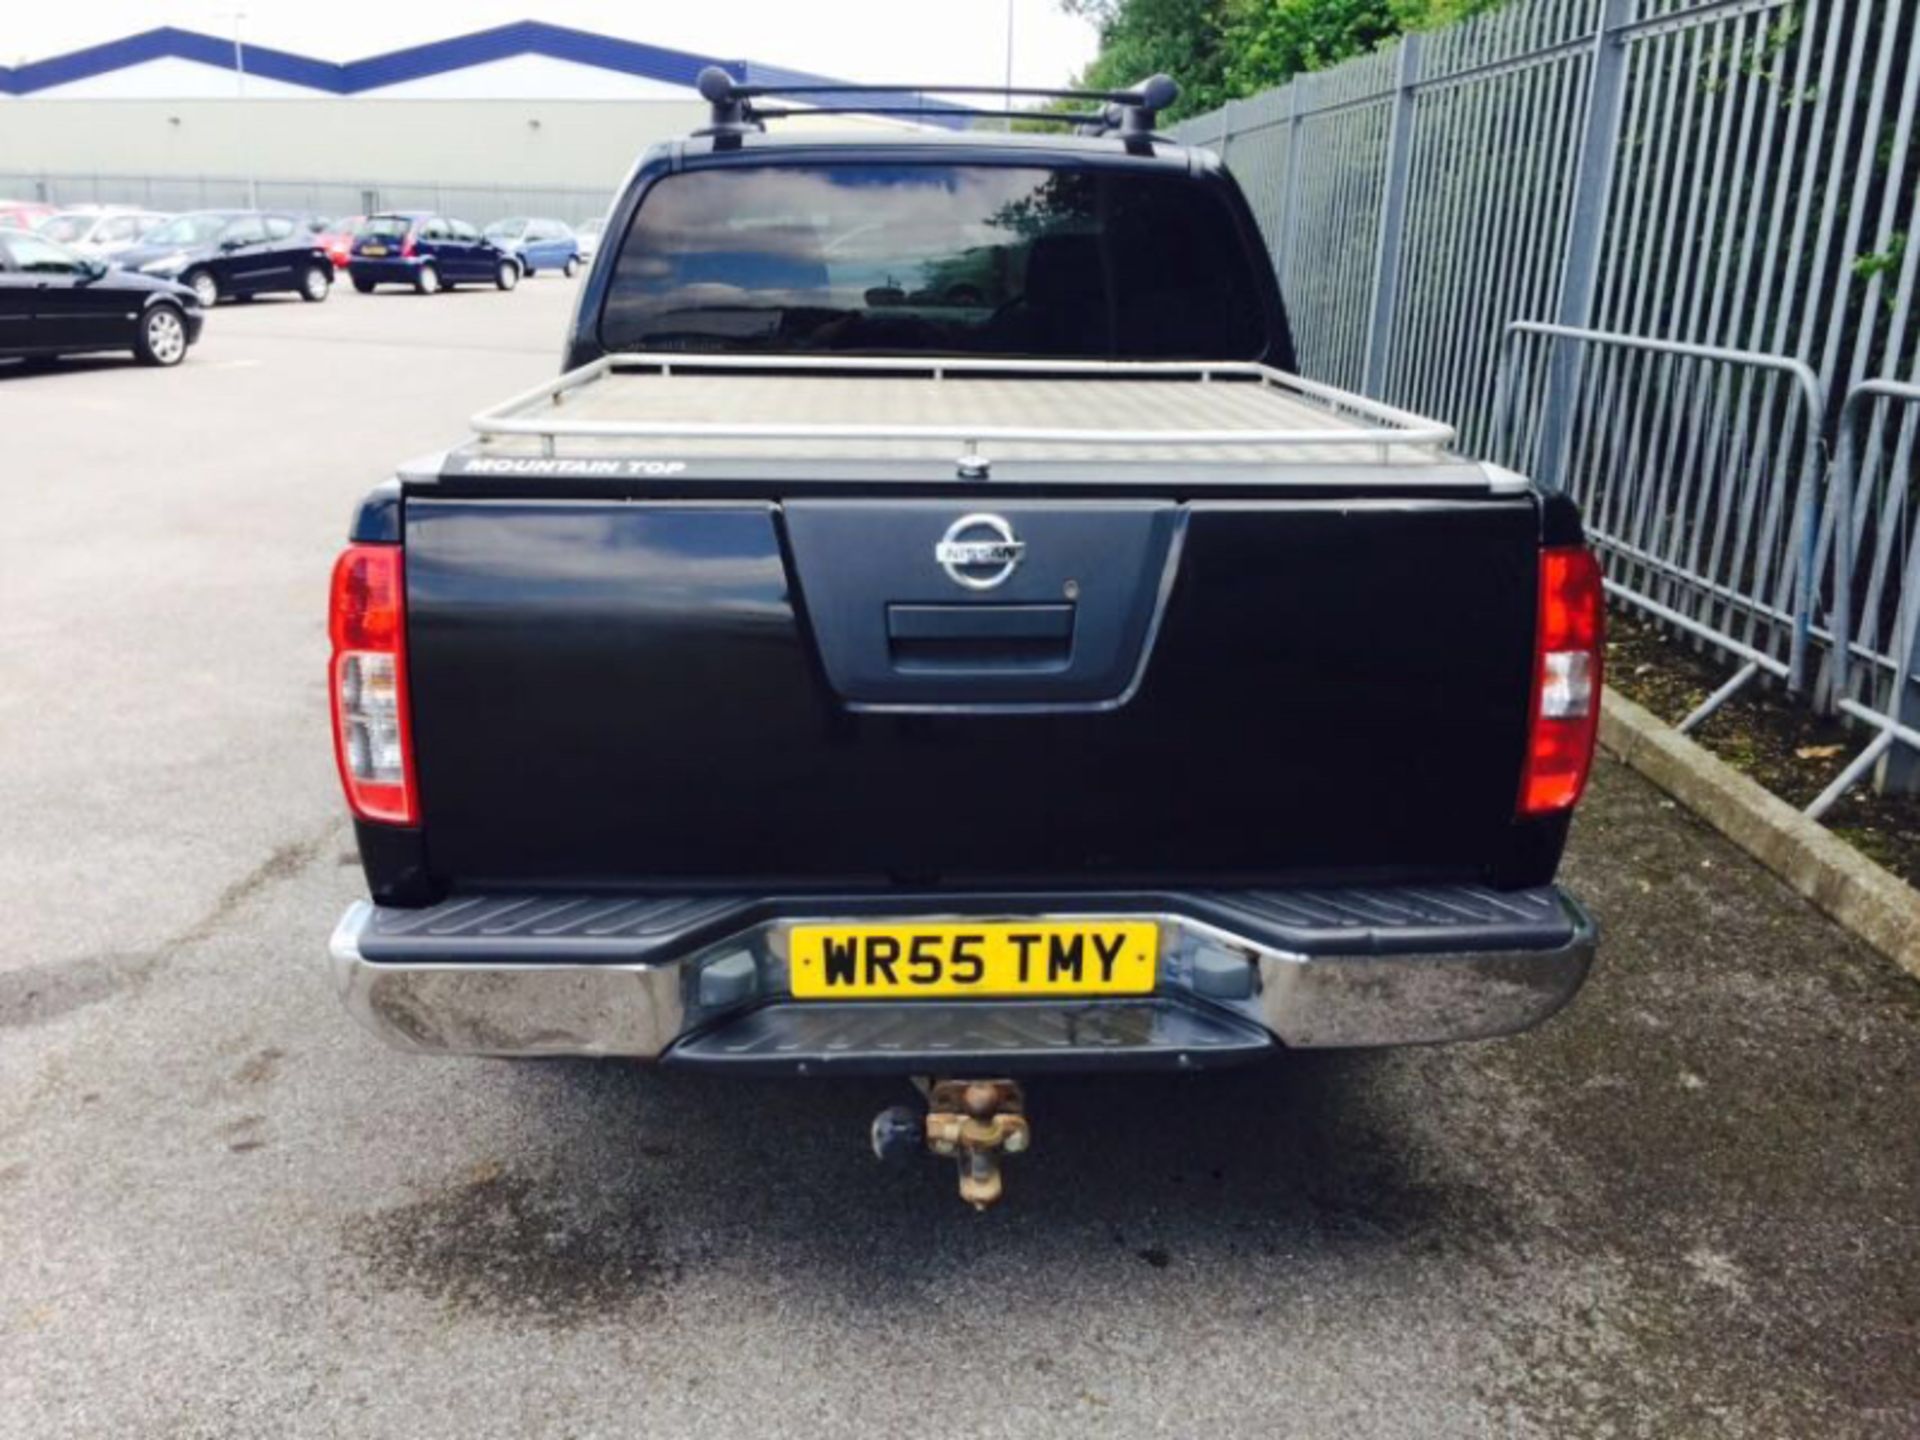 (On Sale) NISSAN NAVARA 2.5DCI - "OUTLAW" DOUBLE CAB - BLACK EDITION - 2006 - GREAT SPEC - NO VAT - Image 5 of 11